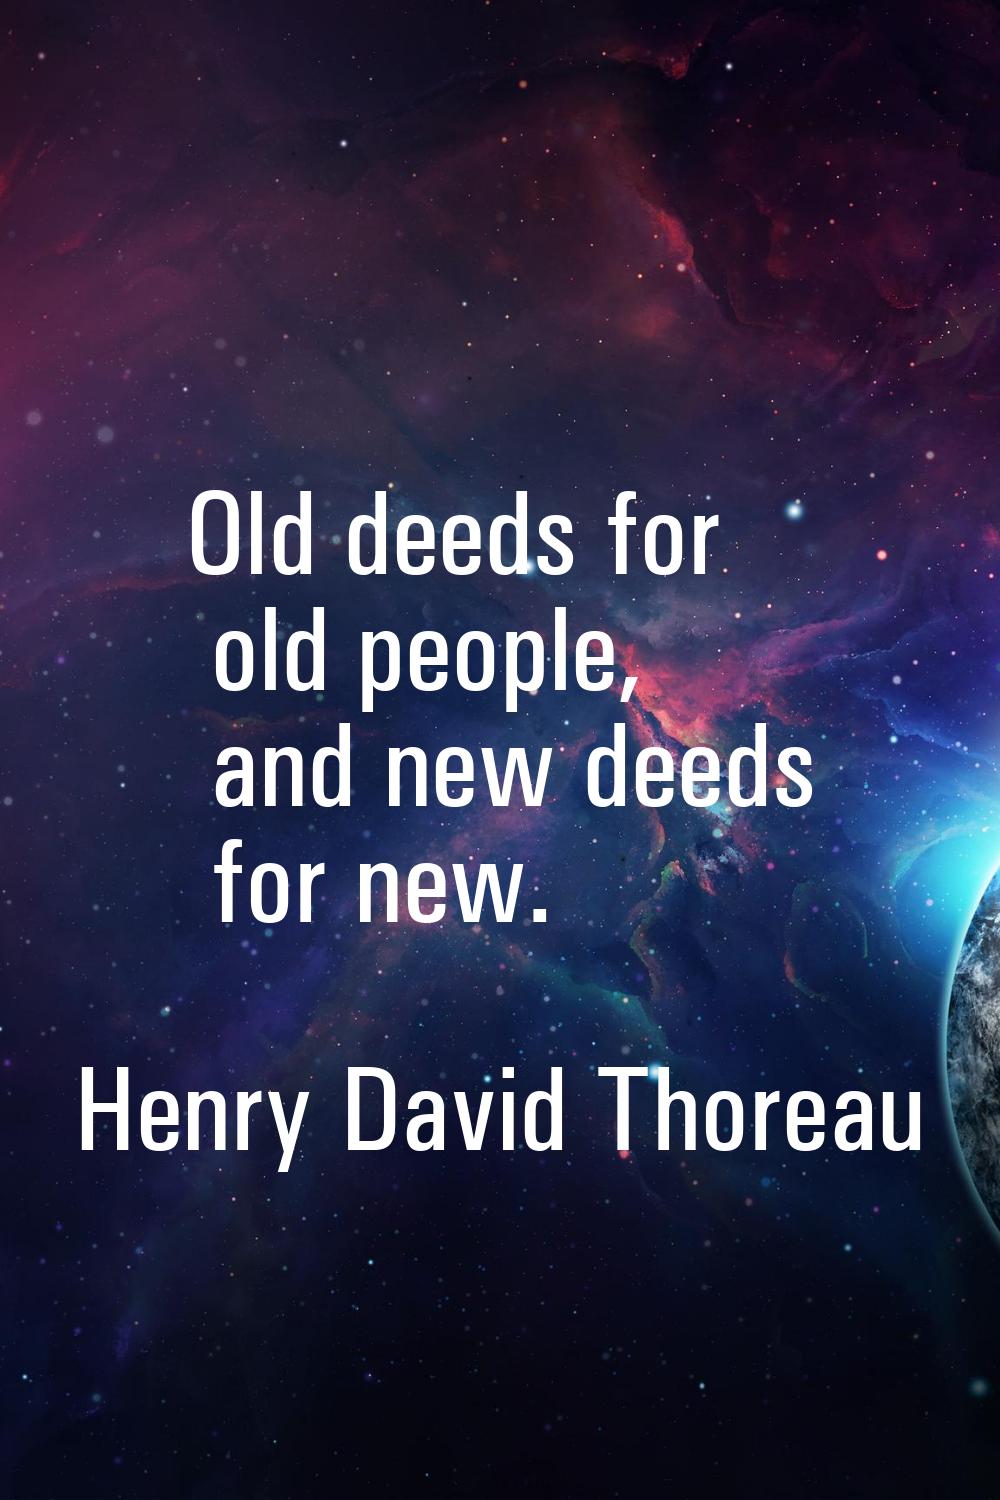 Old deeds for old people, and new deeds for new.